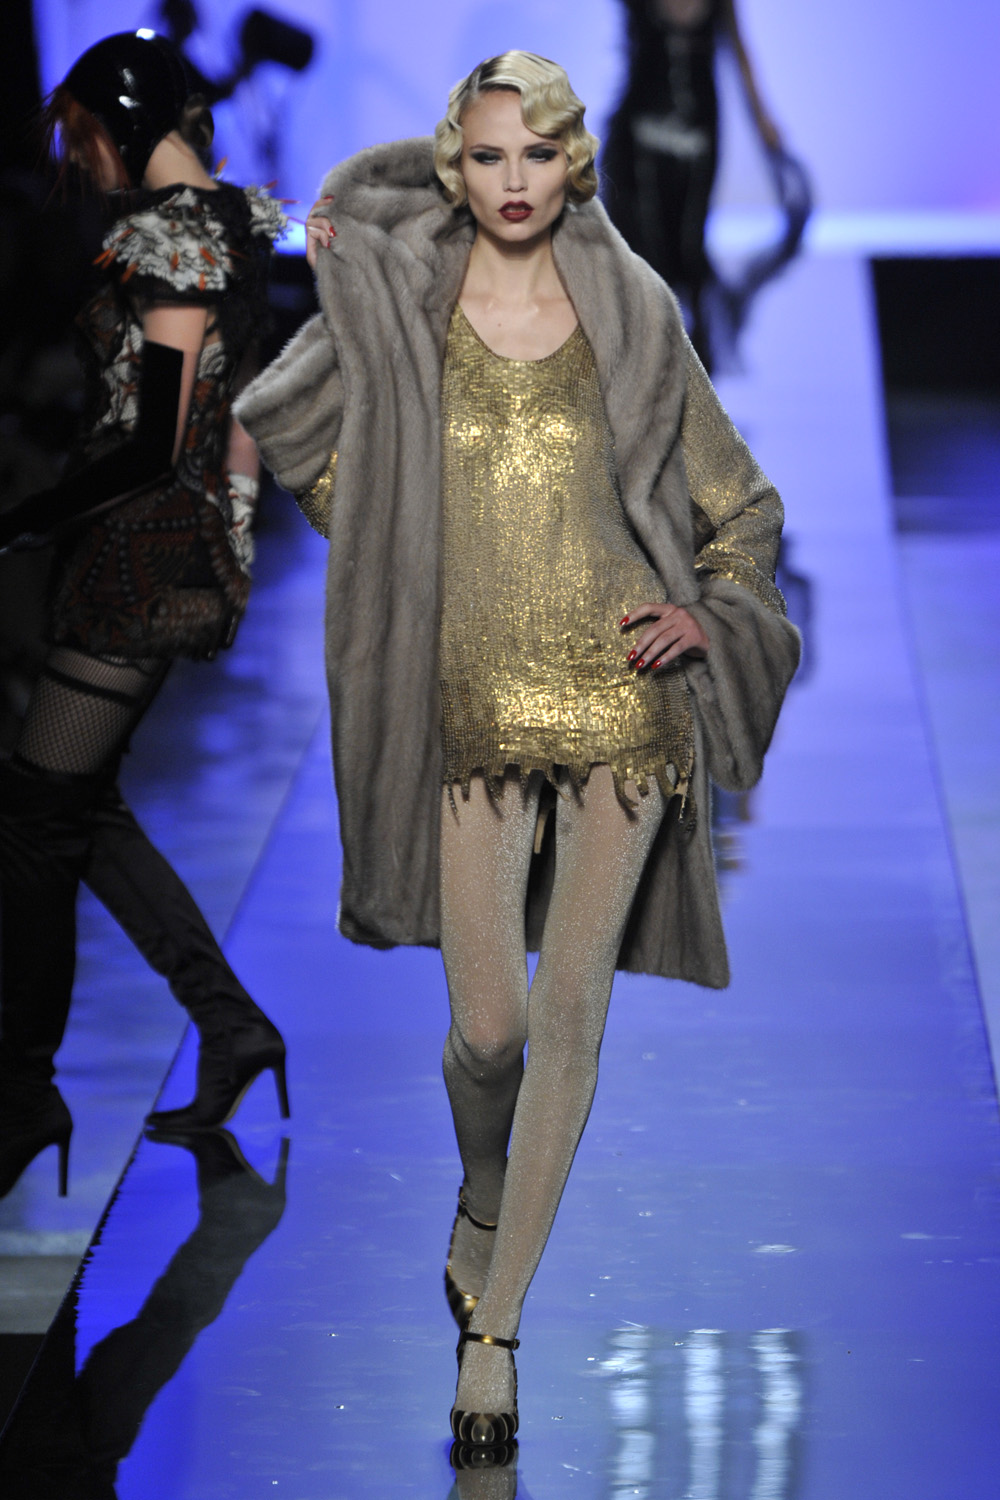 Jean Paul Gaultier Haute Couture Fall 2009: A Couture High